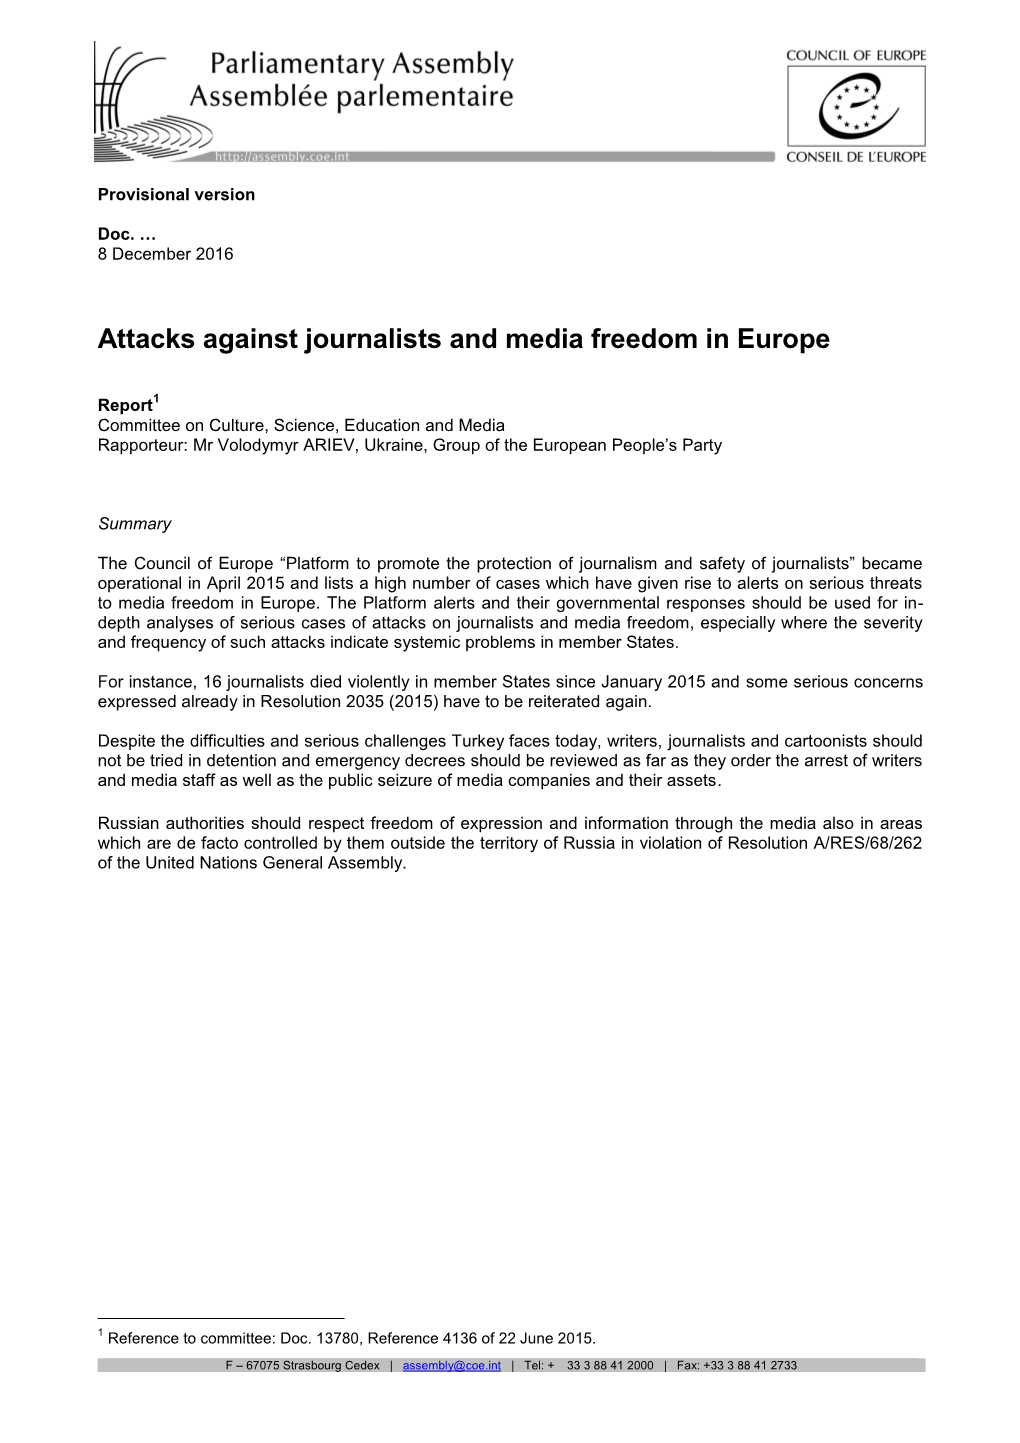 Attacks Against Journalists and Media Freedom in Europe